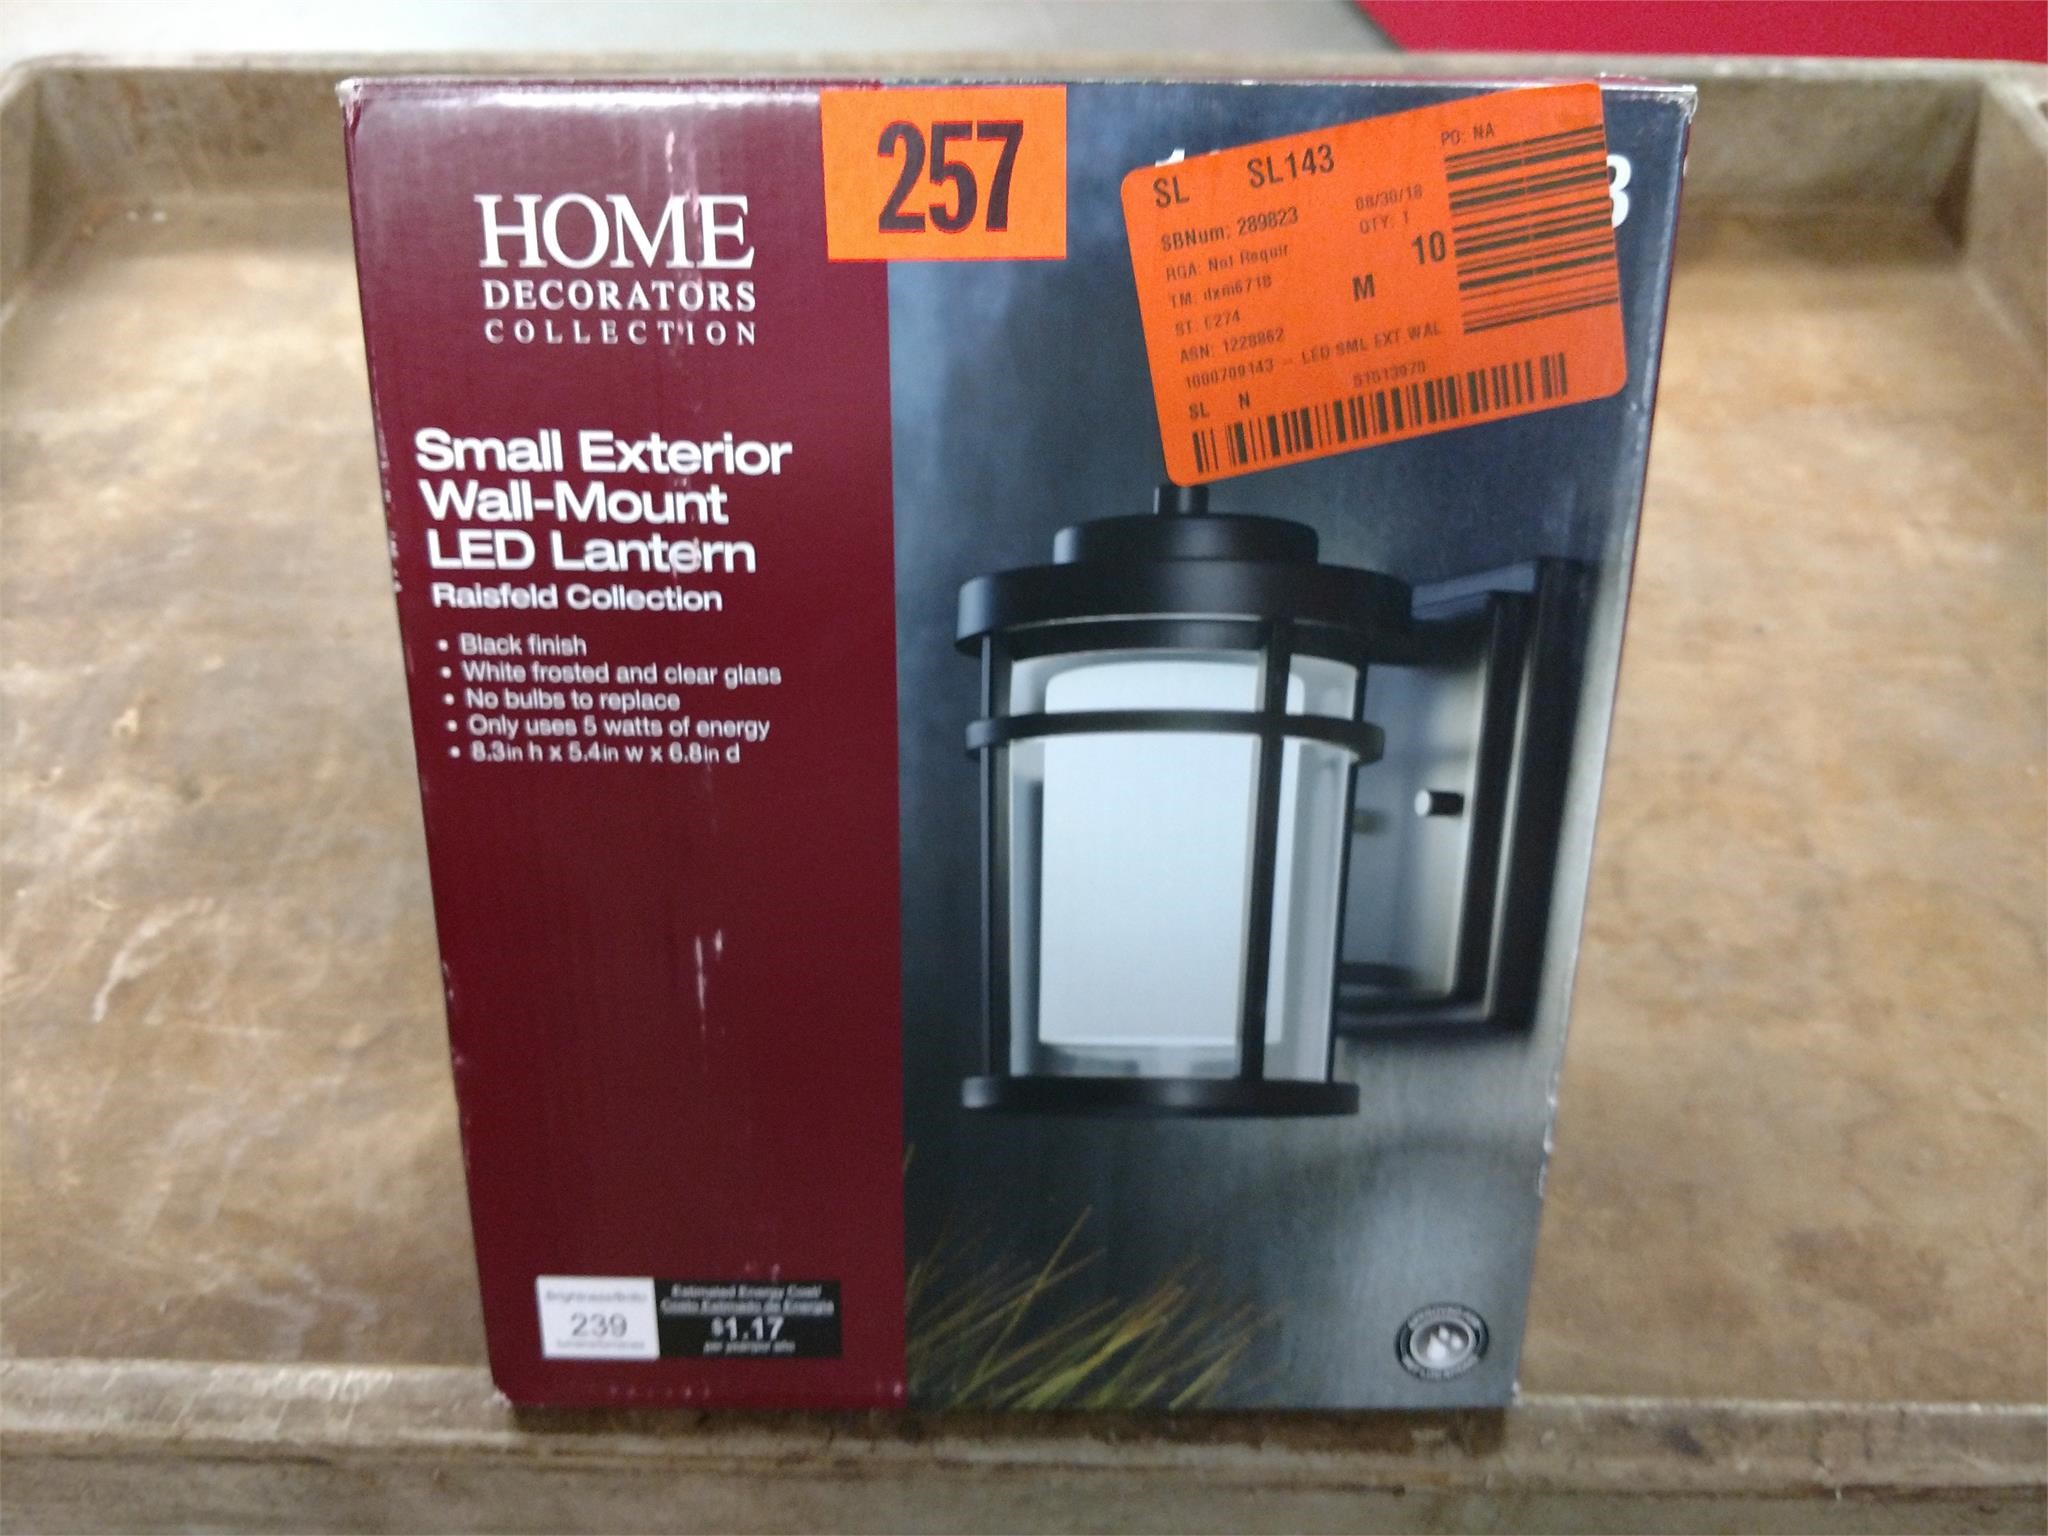 Home depot over stock and returns